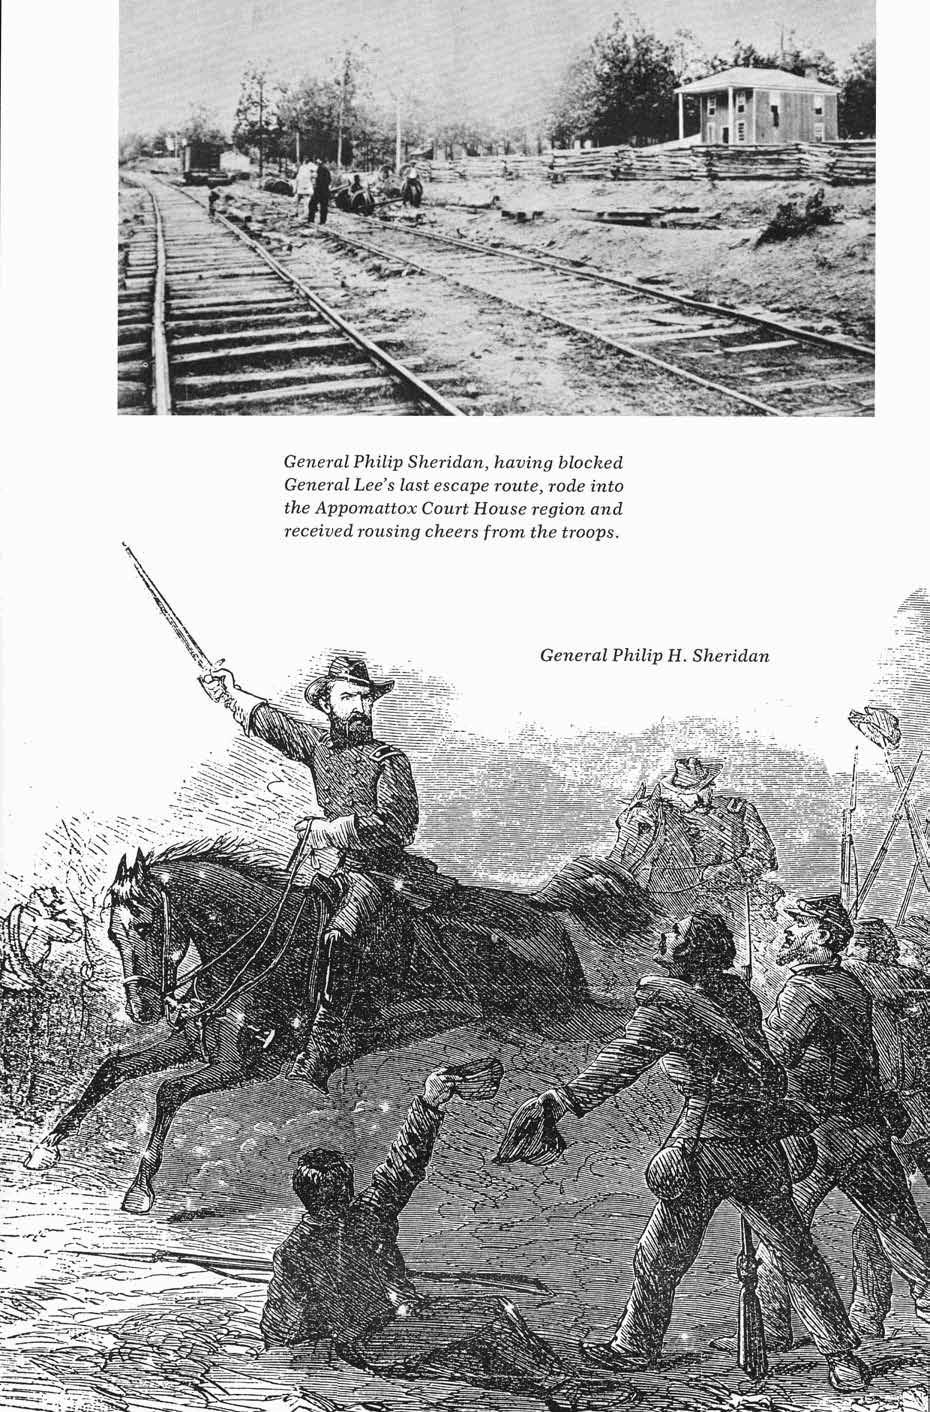 w General Philip Sheridan, having blocked General Lee's last escape route, rode into the